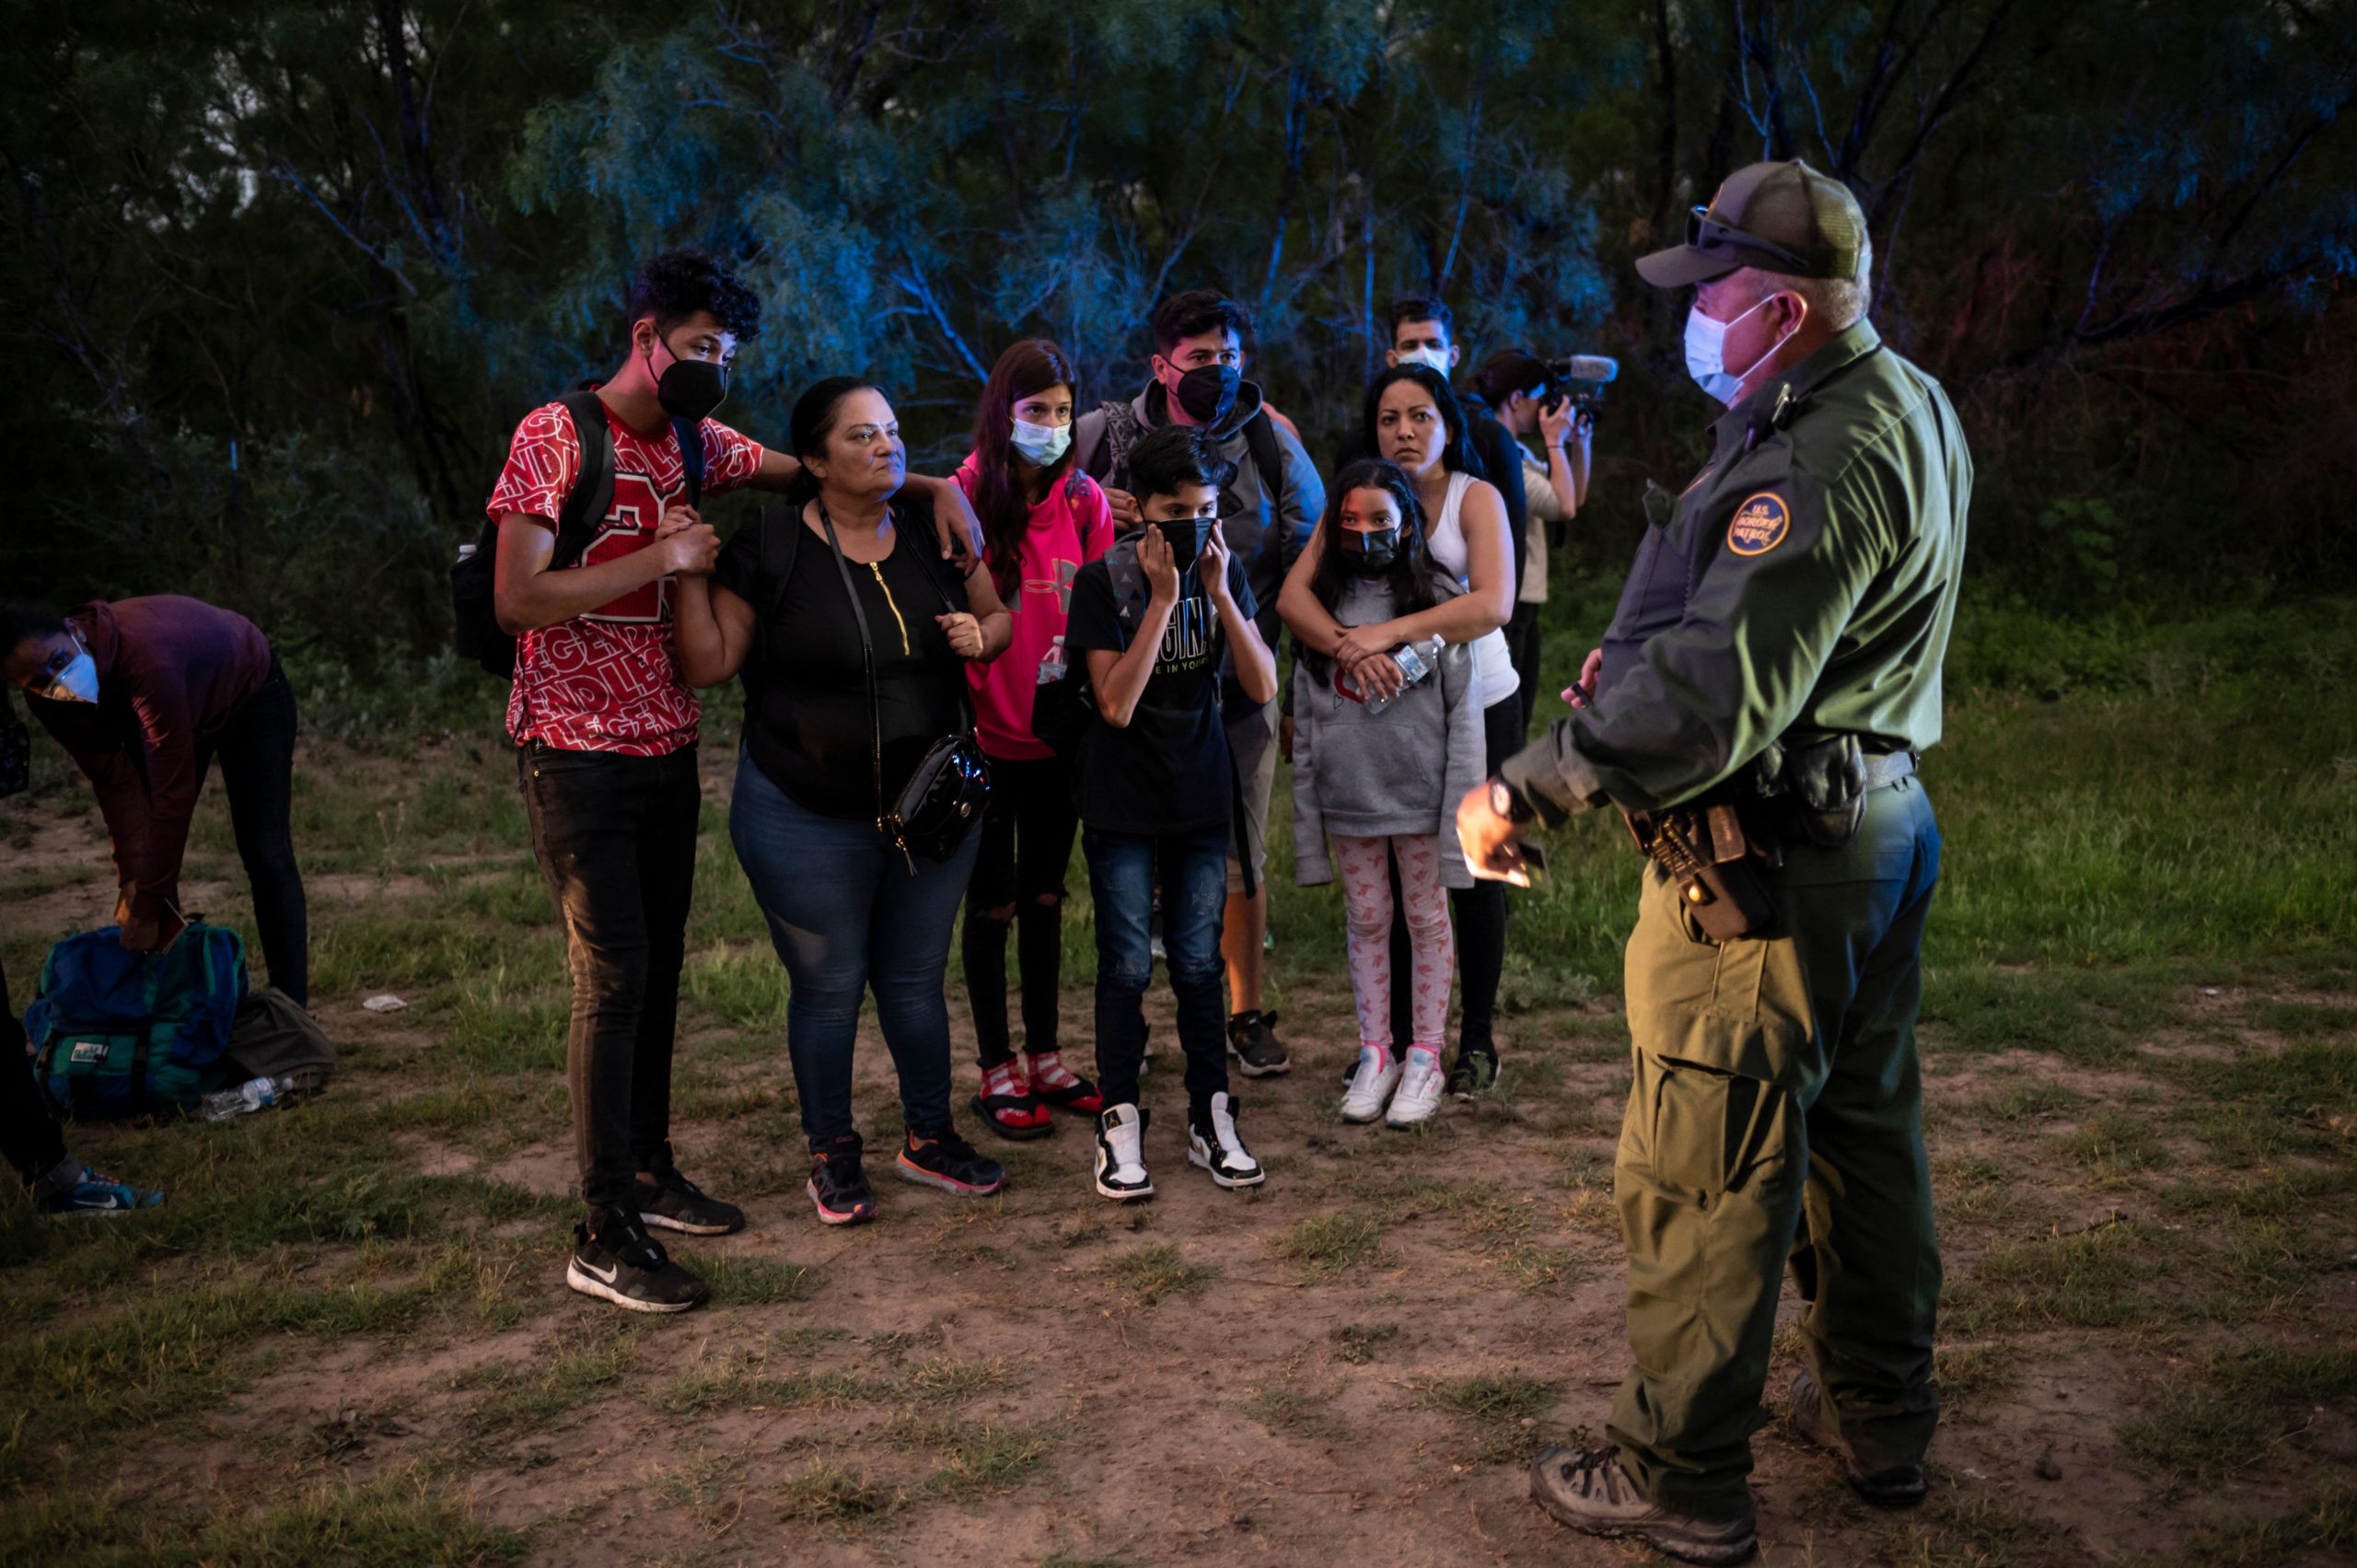 A migrant family waits to be processed after being apprehended near the border between Mexico and the United States in Del Rio, Texas on May 16, 2021. (Photo by SERGIO FLORES/AFP via Getty Images)